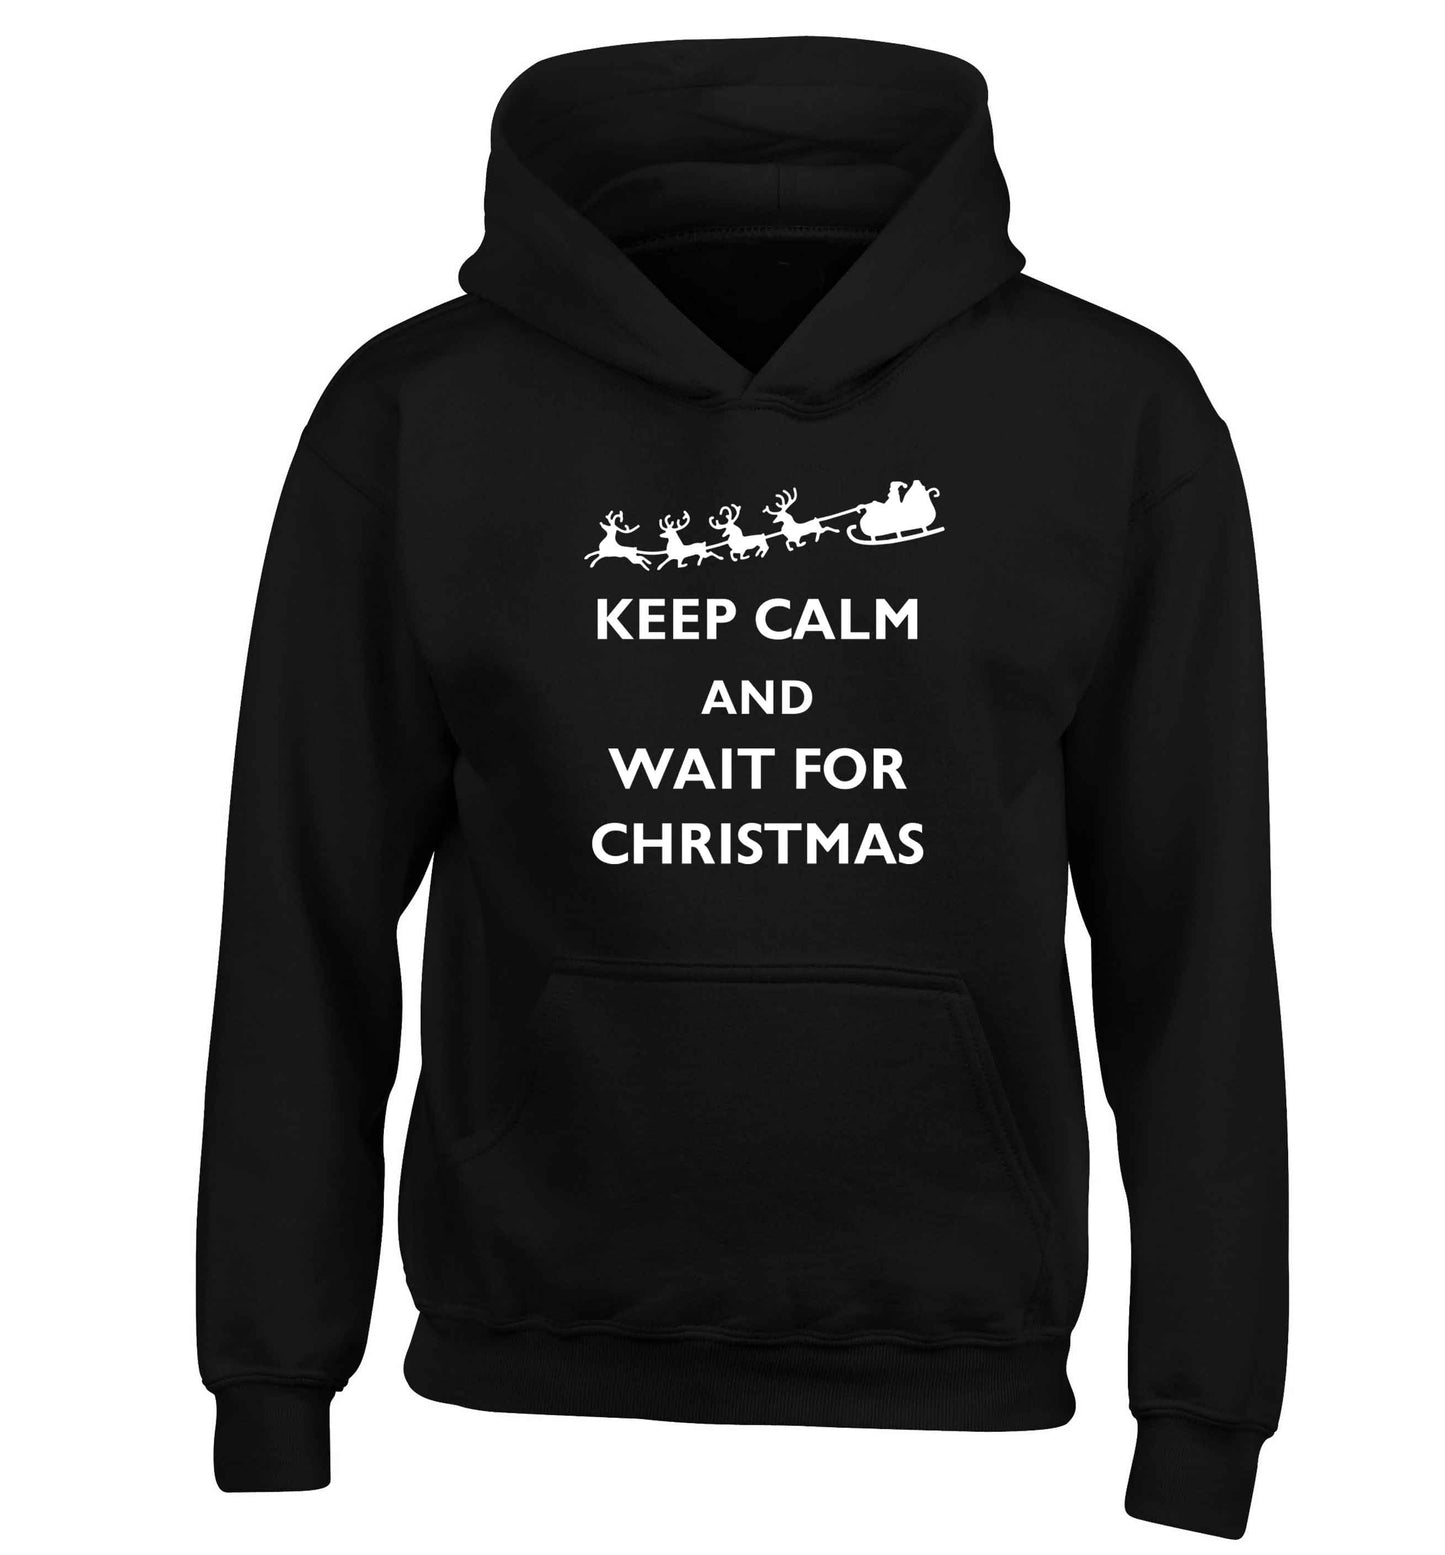 Keep calm and wait for Christmas children's black hoodie 12-13 Years